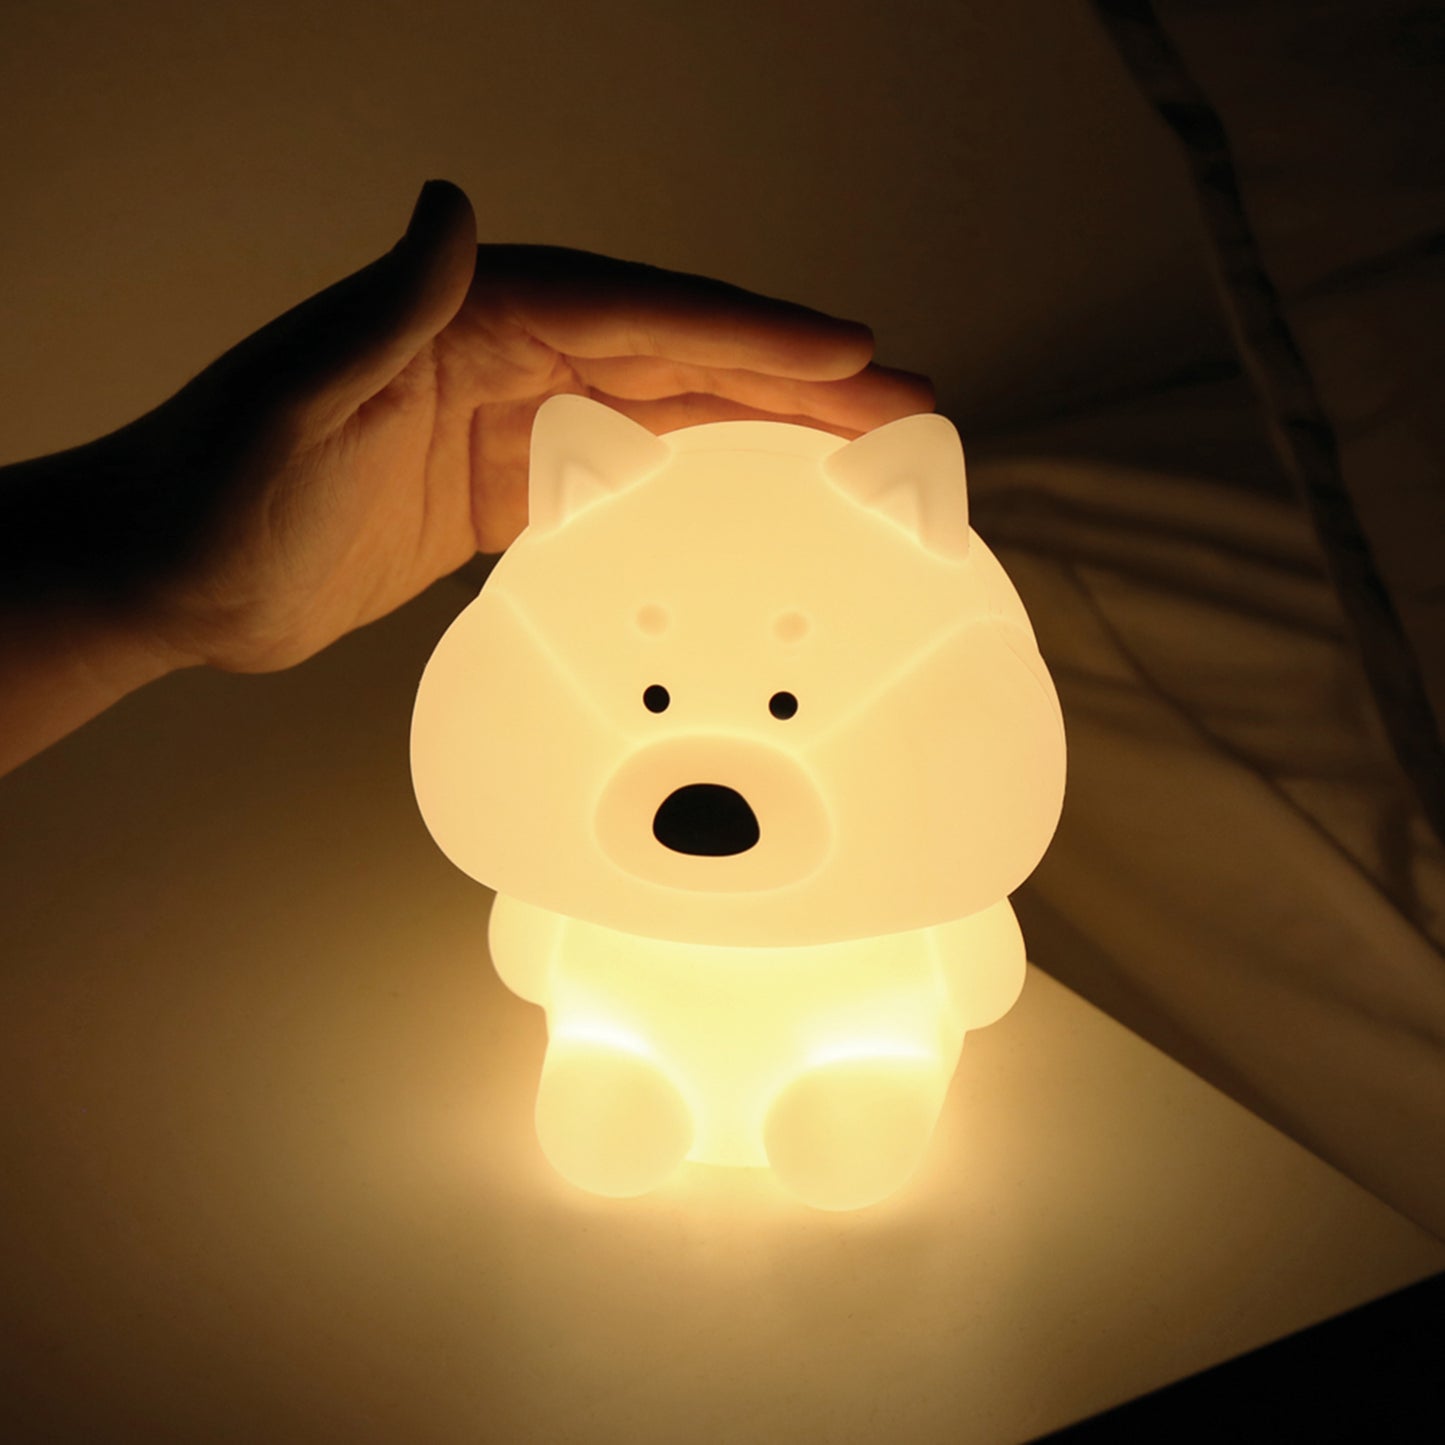 Model is softly petting the glowing shiba mood lamp on their bedside table.